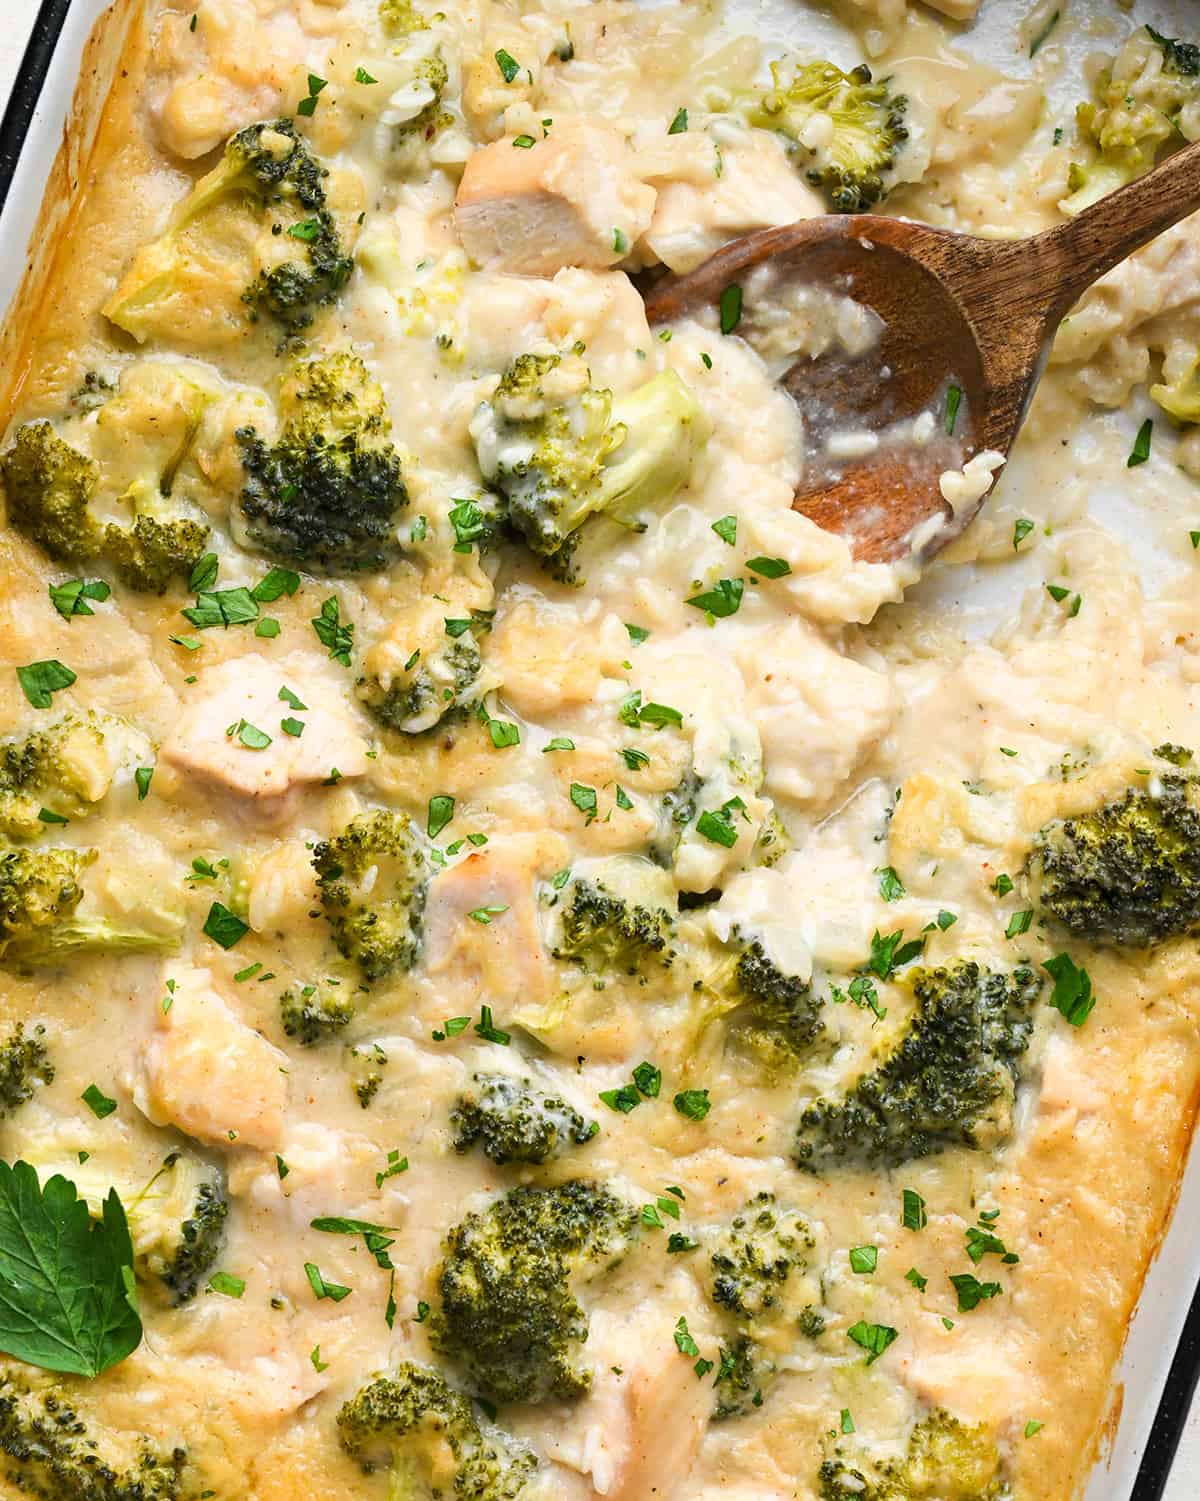 Broccoli Chicken and Rice Casserole in a baking dish with a wooden spoon